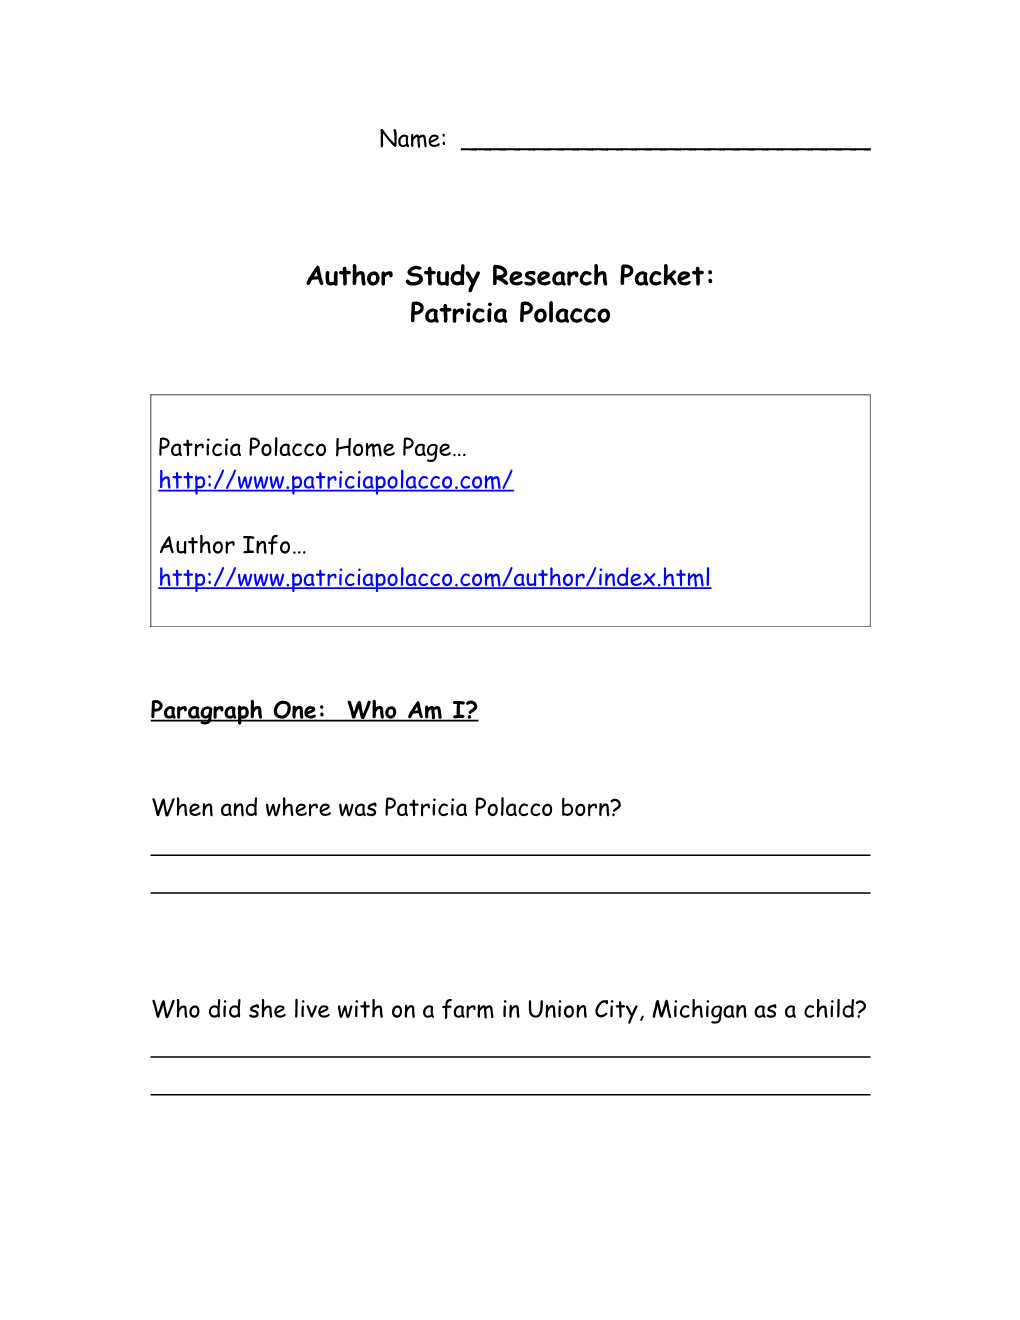 Author Study Research Packet